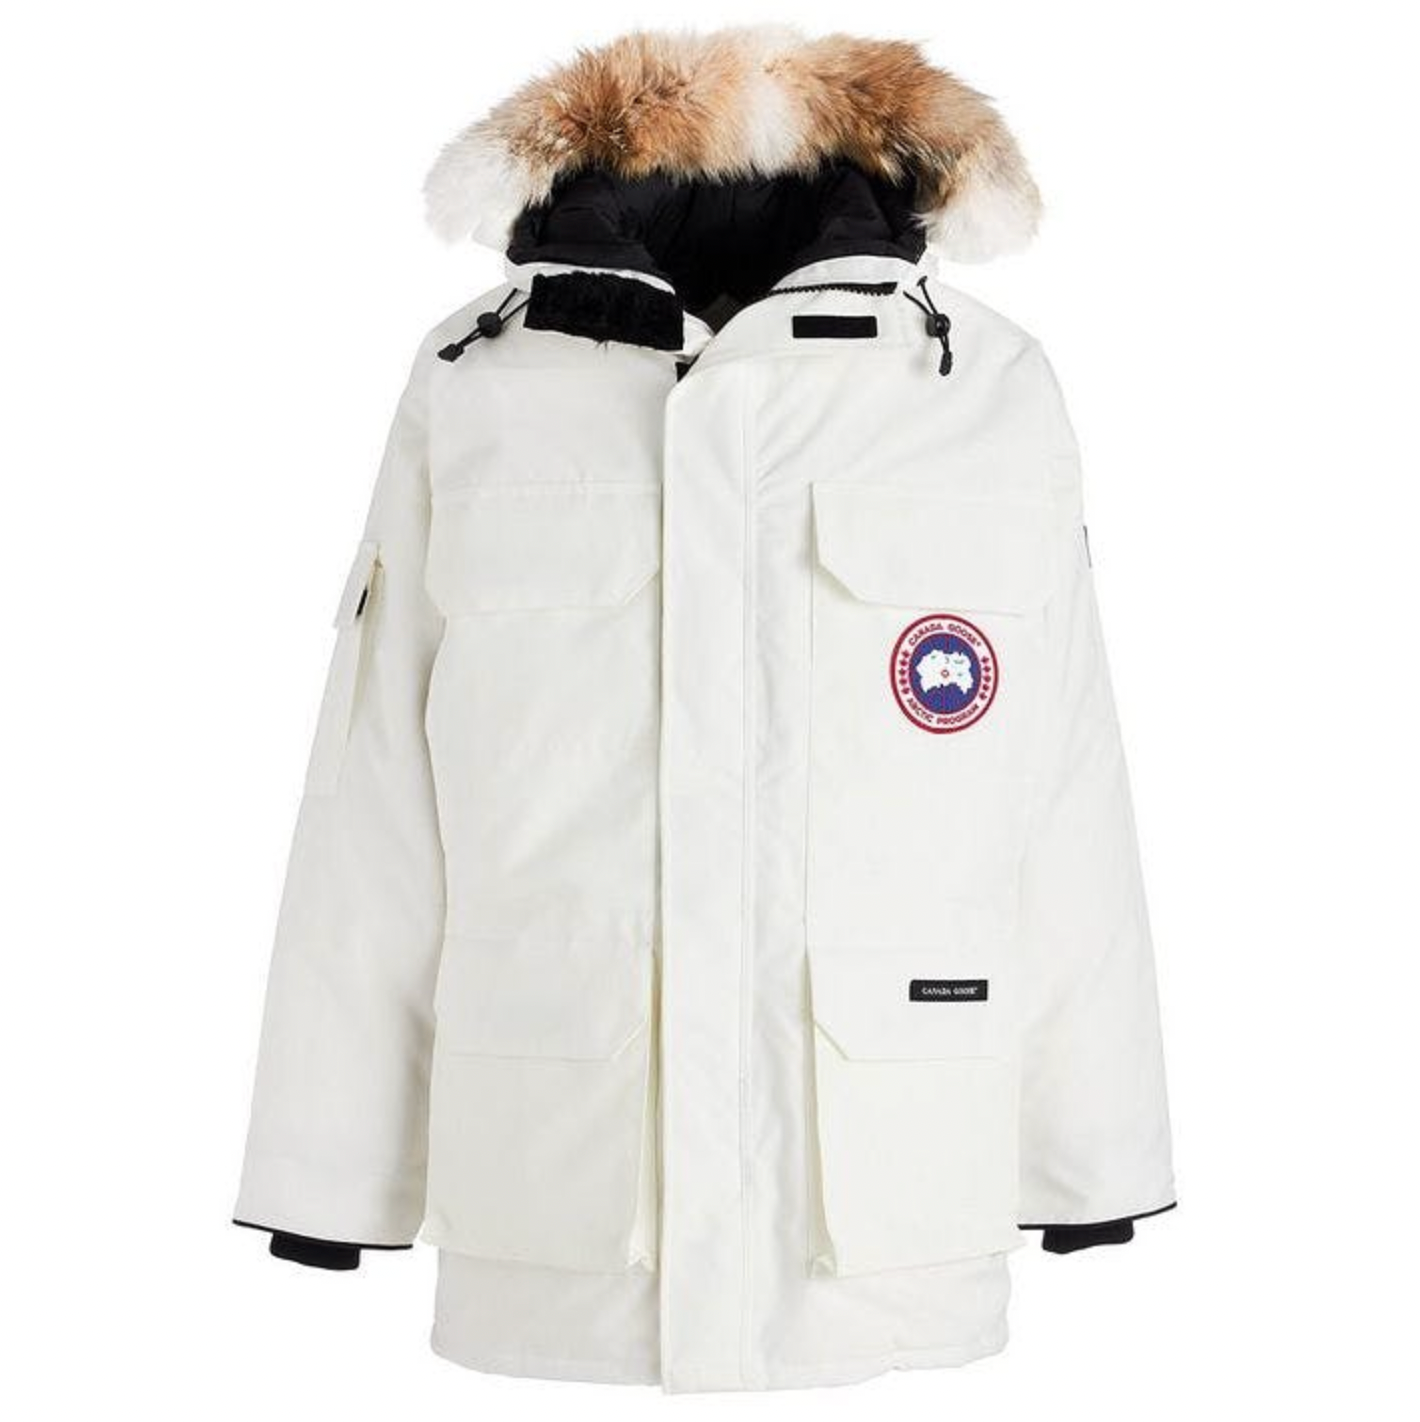 Canada Goose Expedition Padded Parka in white   Down Jacket